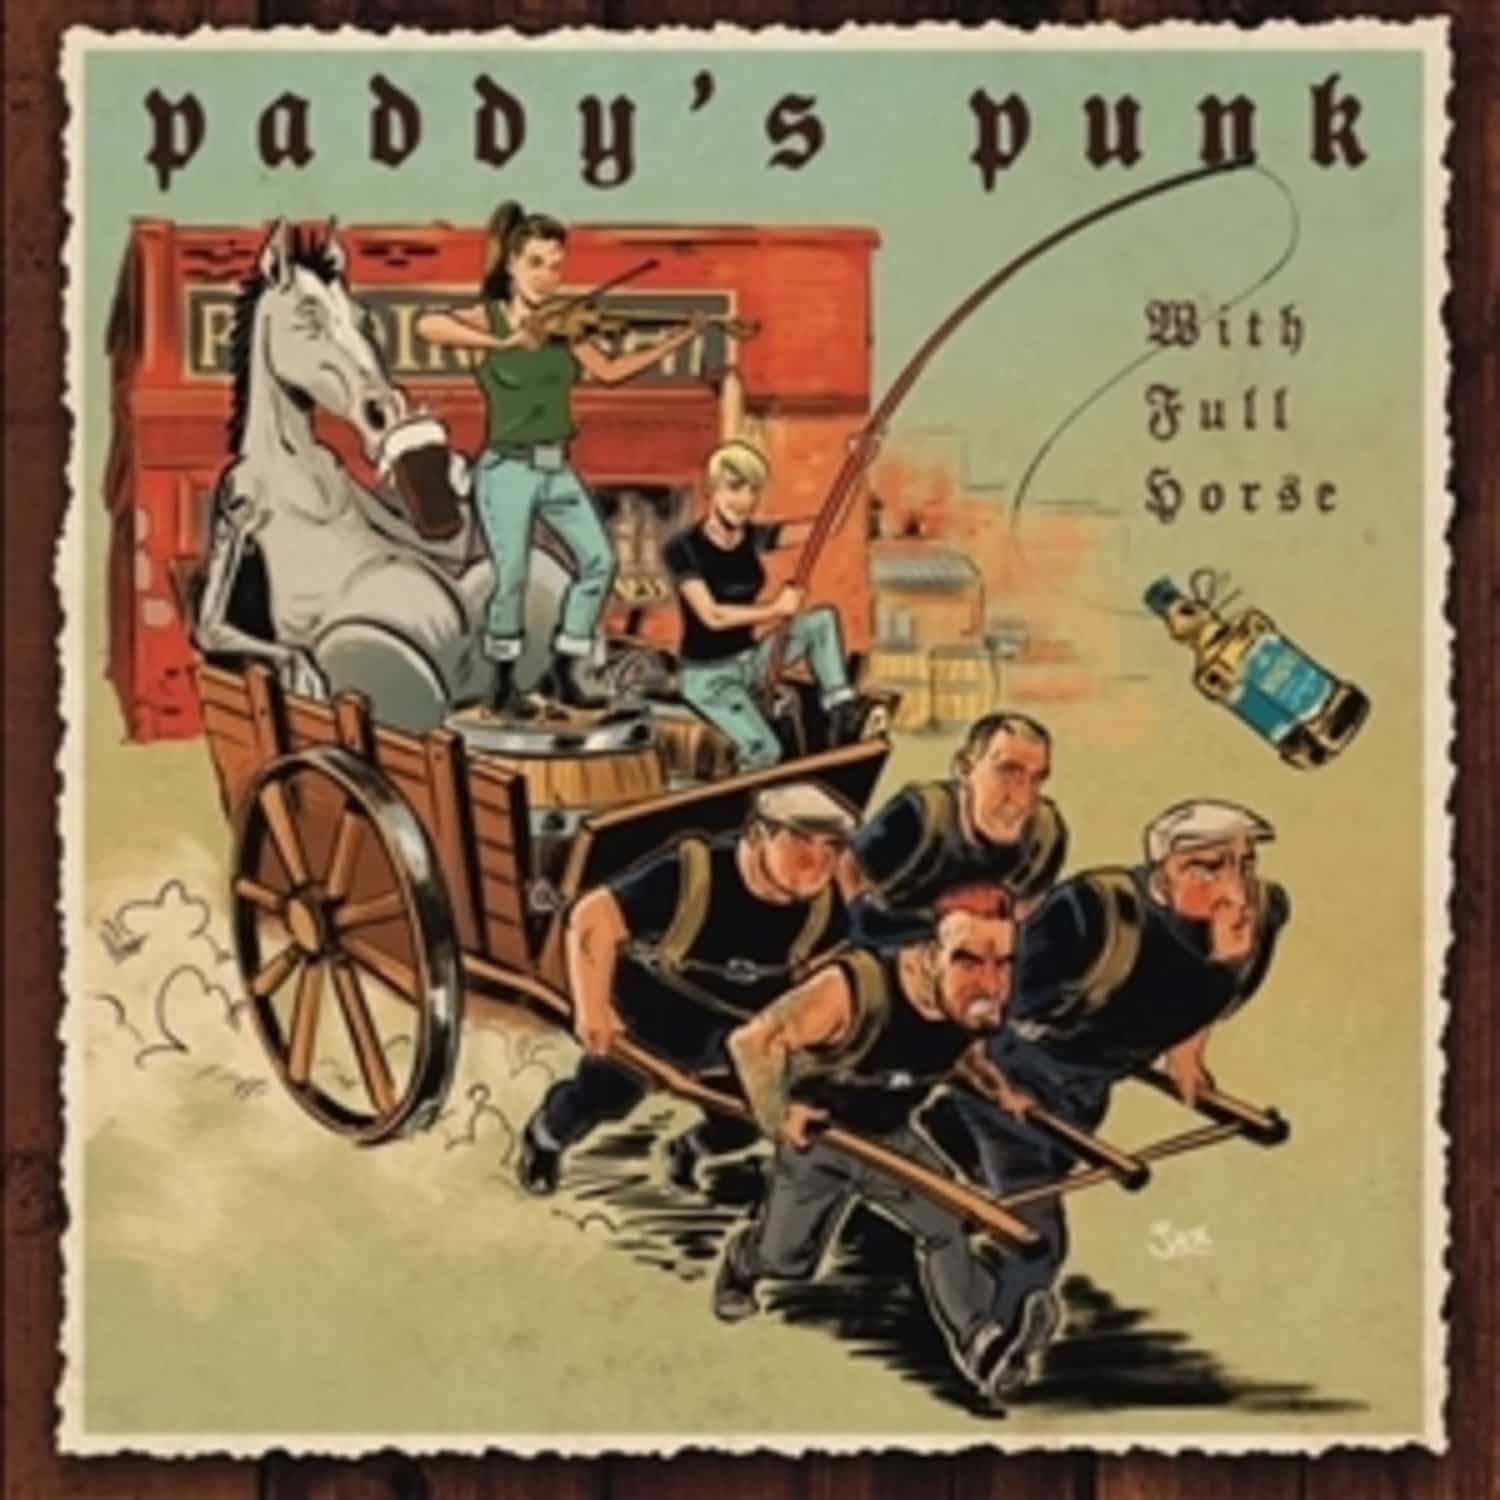 Paddy s Punk - WITH FULL HORSE 